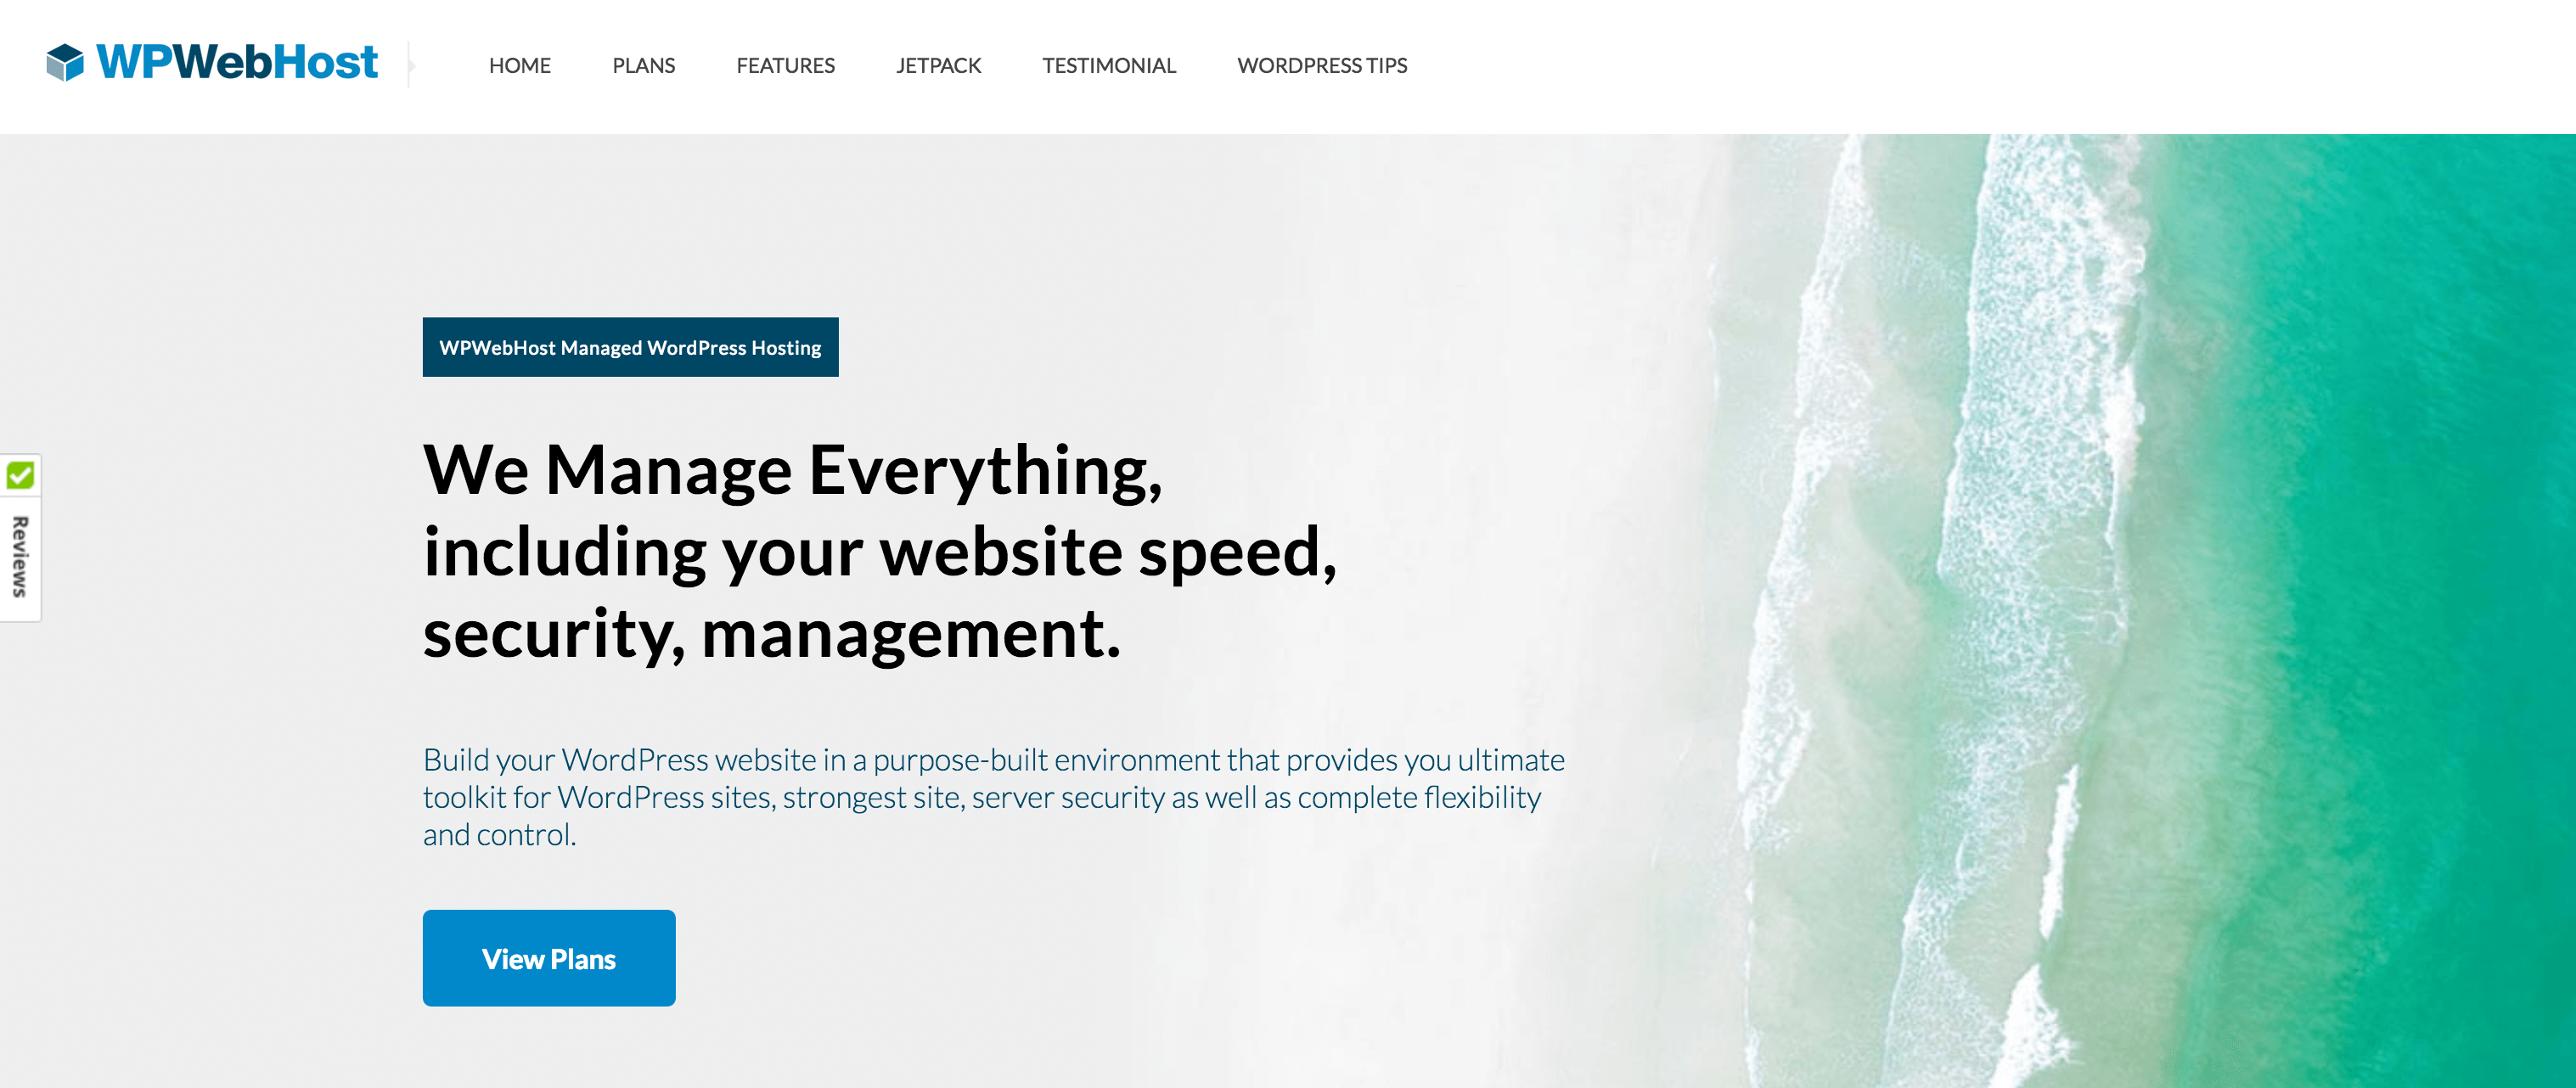 The WPWebHost page for WordPress managed hosting.